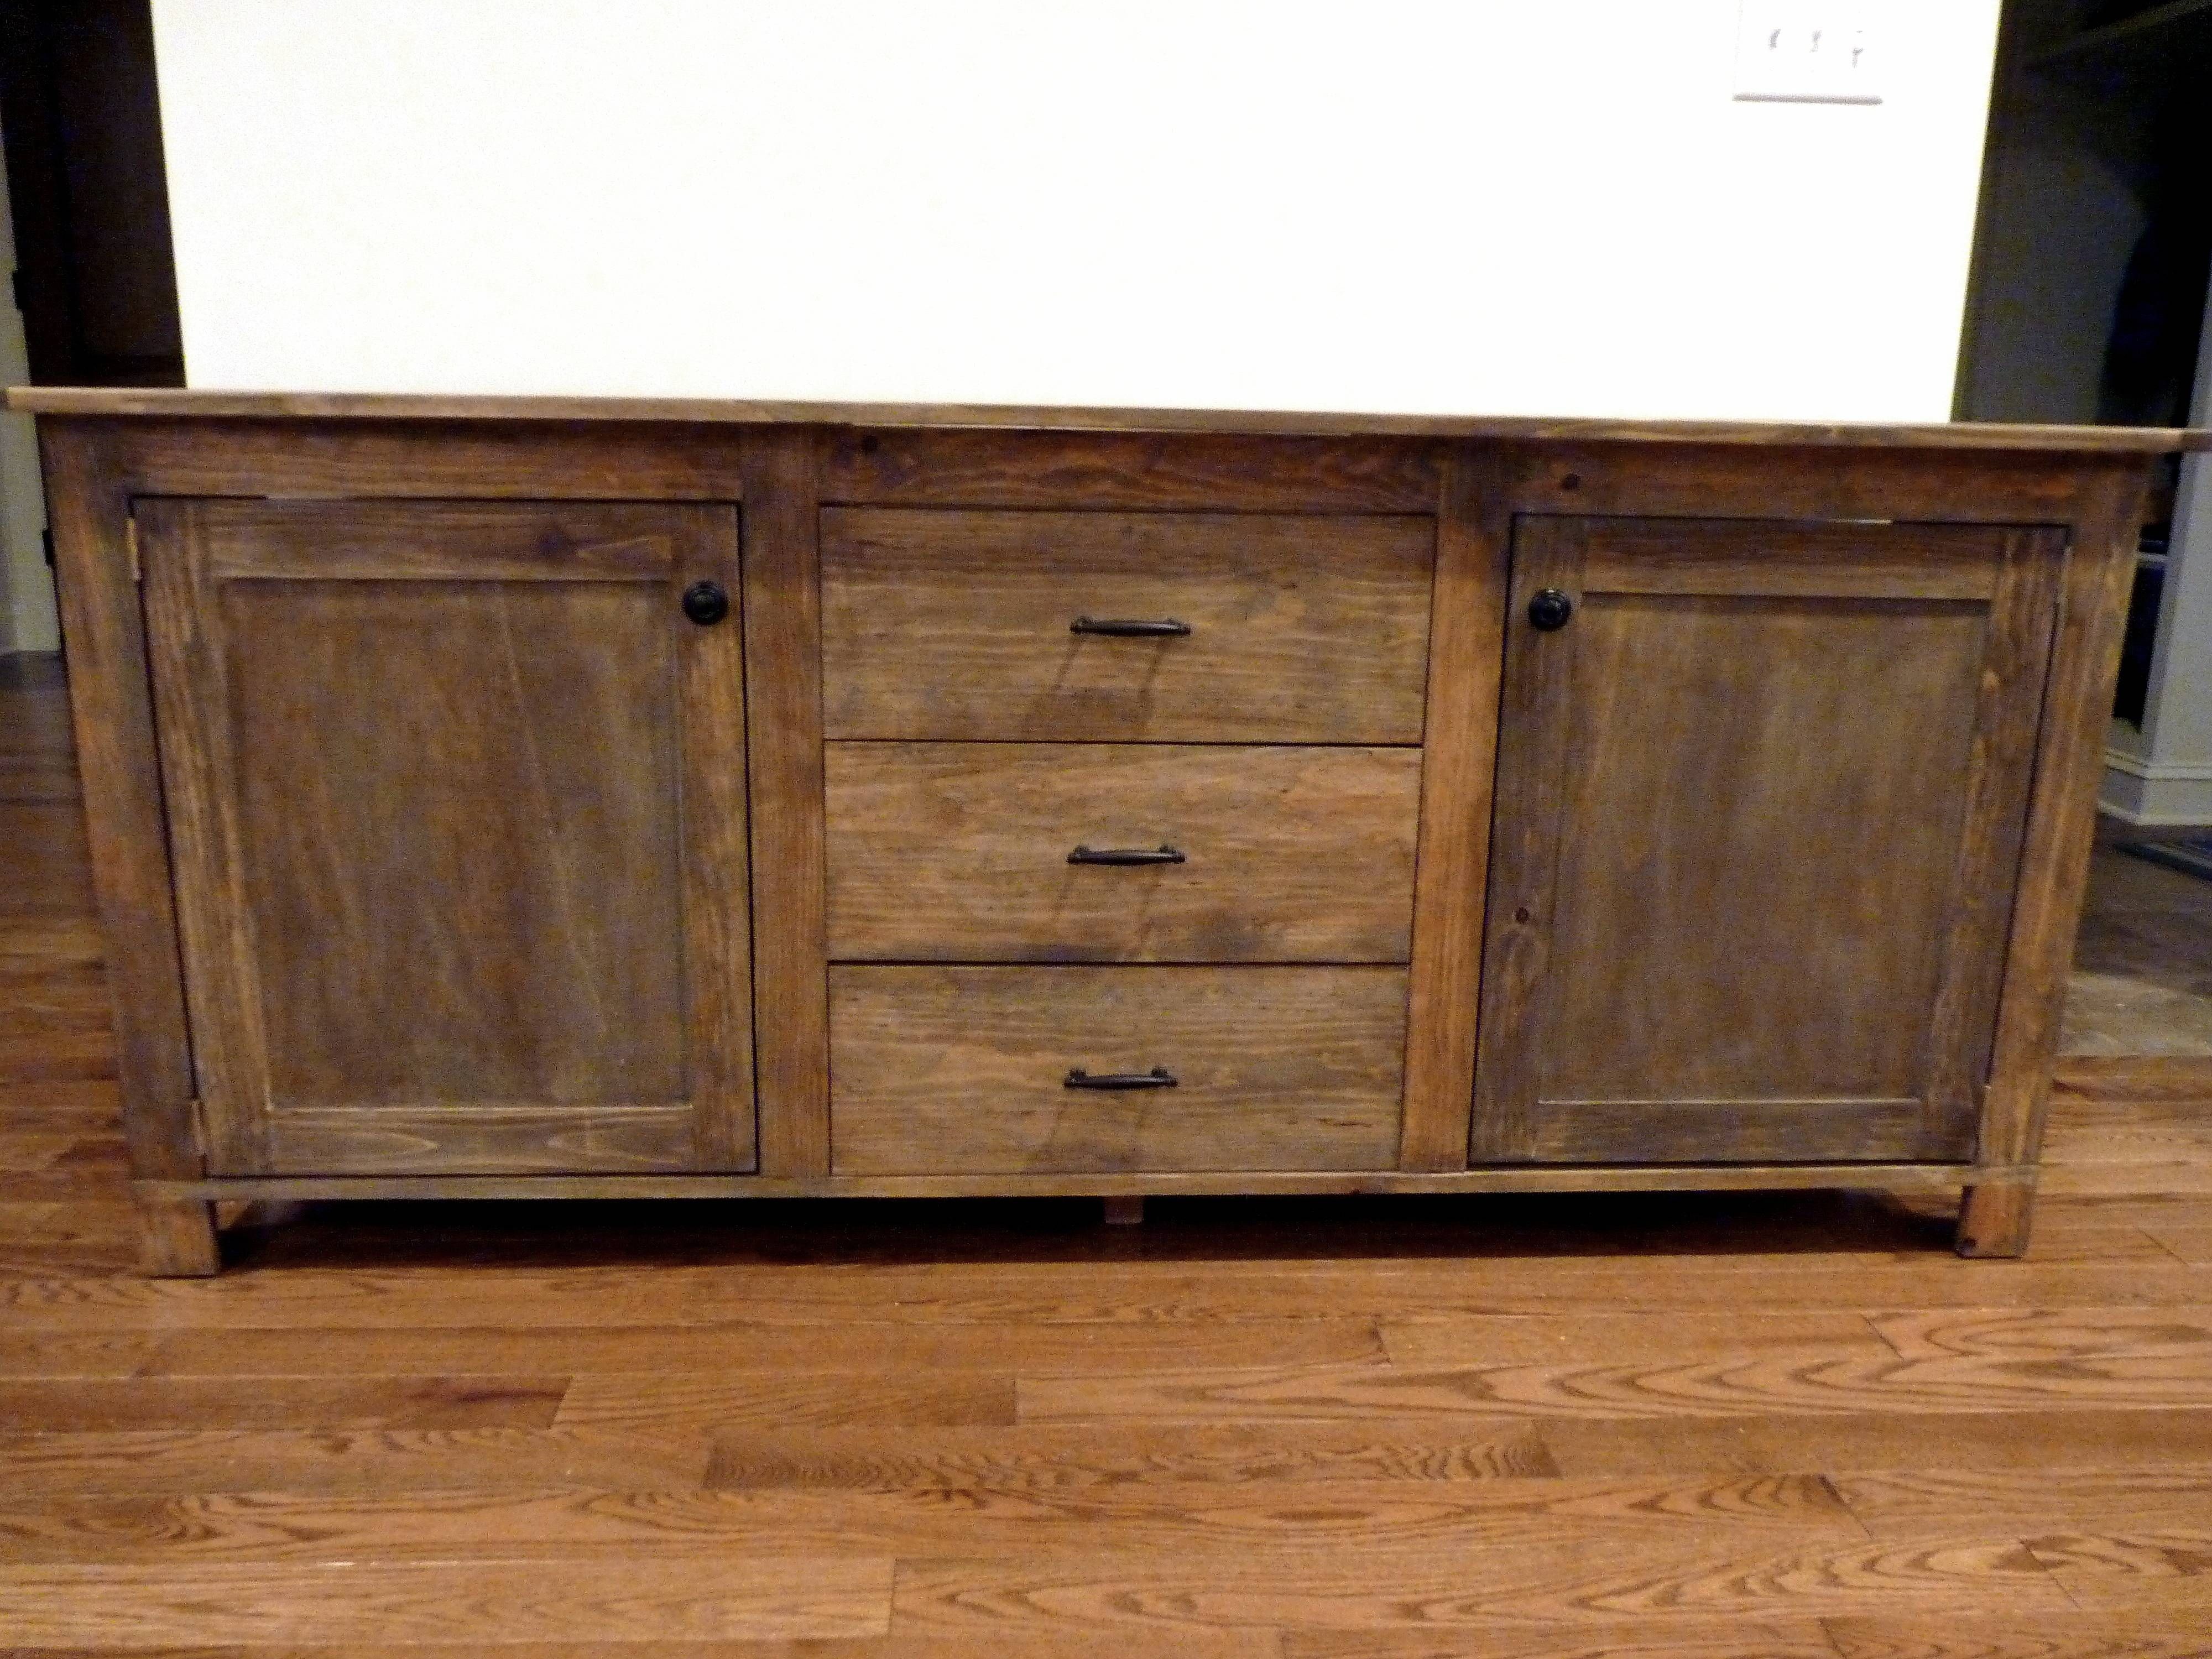 Decor: Wonderful Unique Rustic Sideboard For Making Home Furniture With Regard To Metal Sideboard Furniture (View 11 of 30)